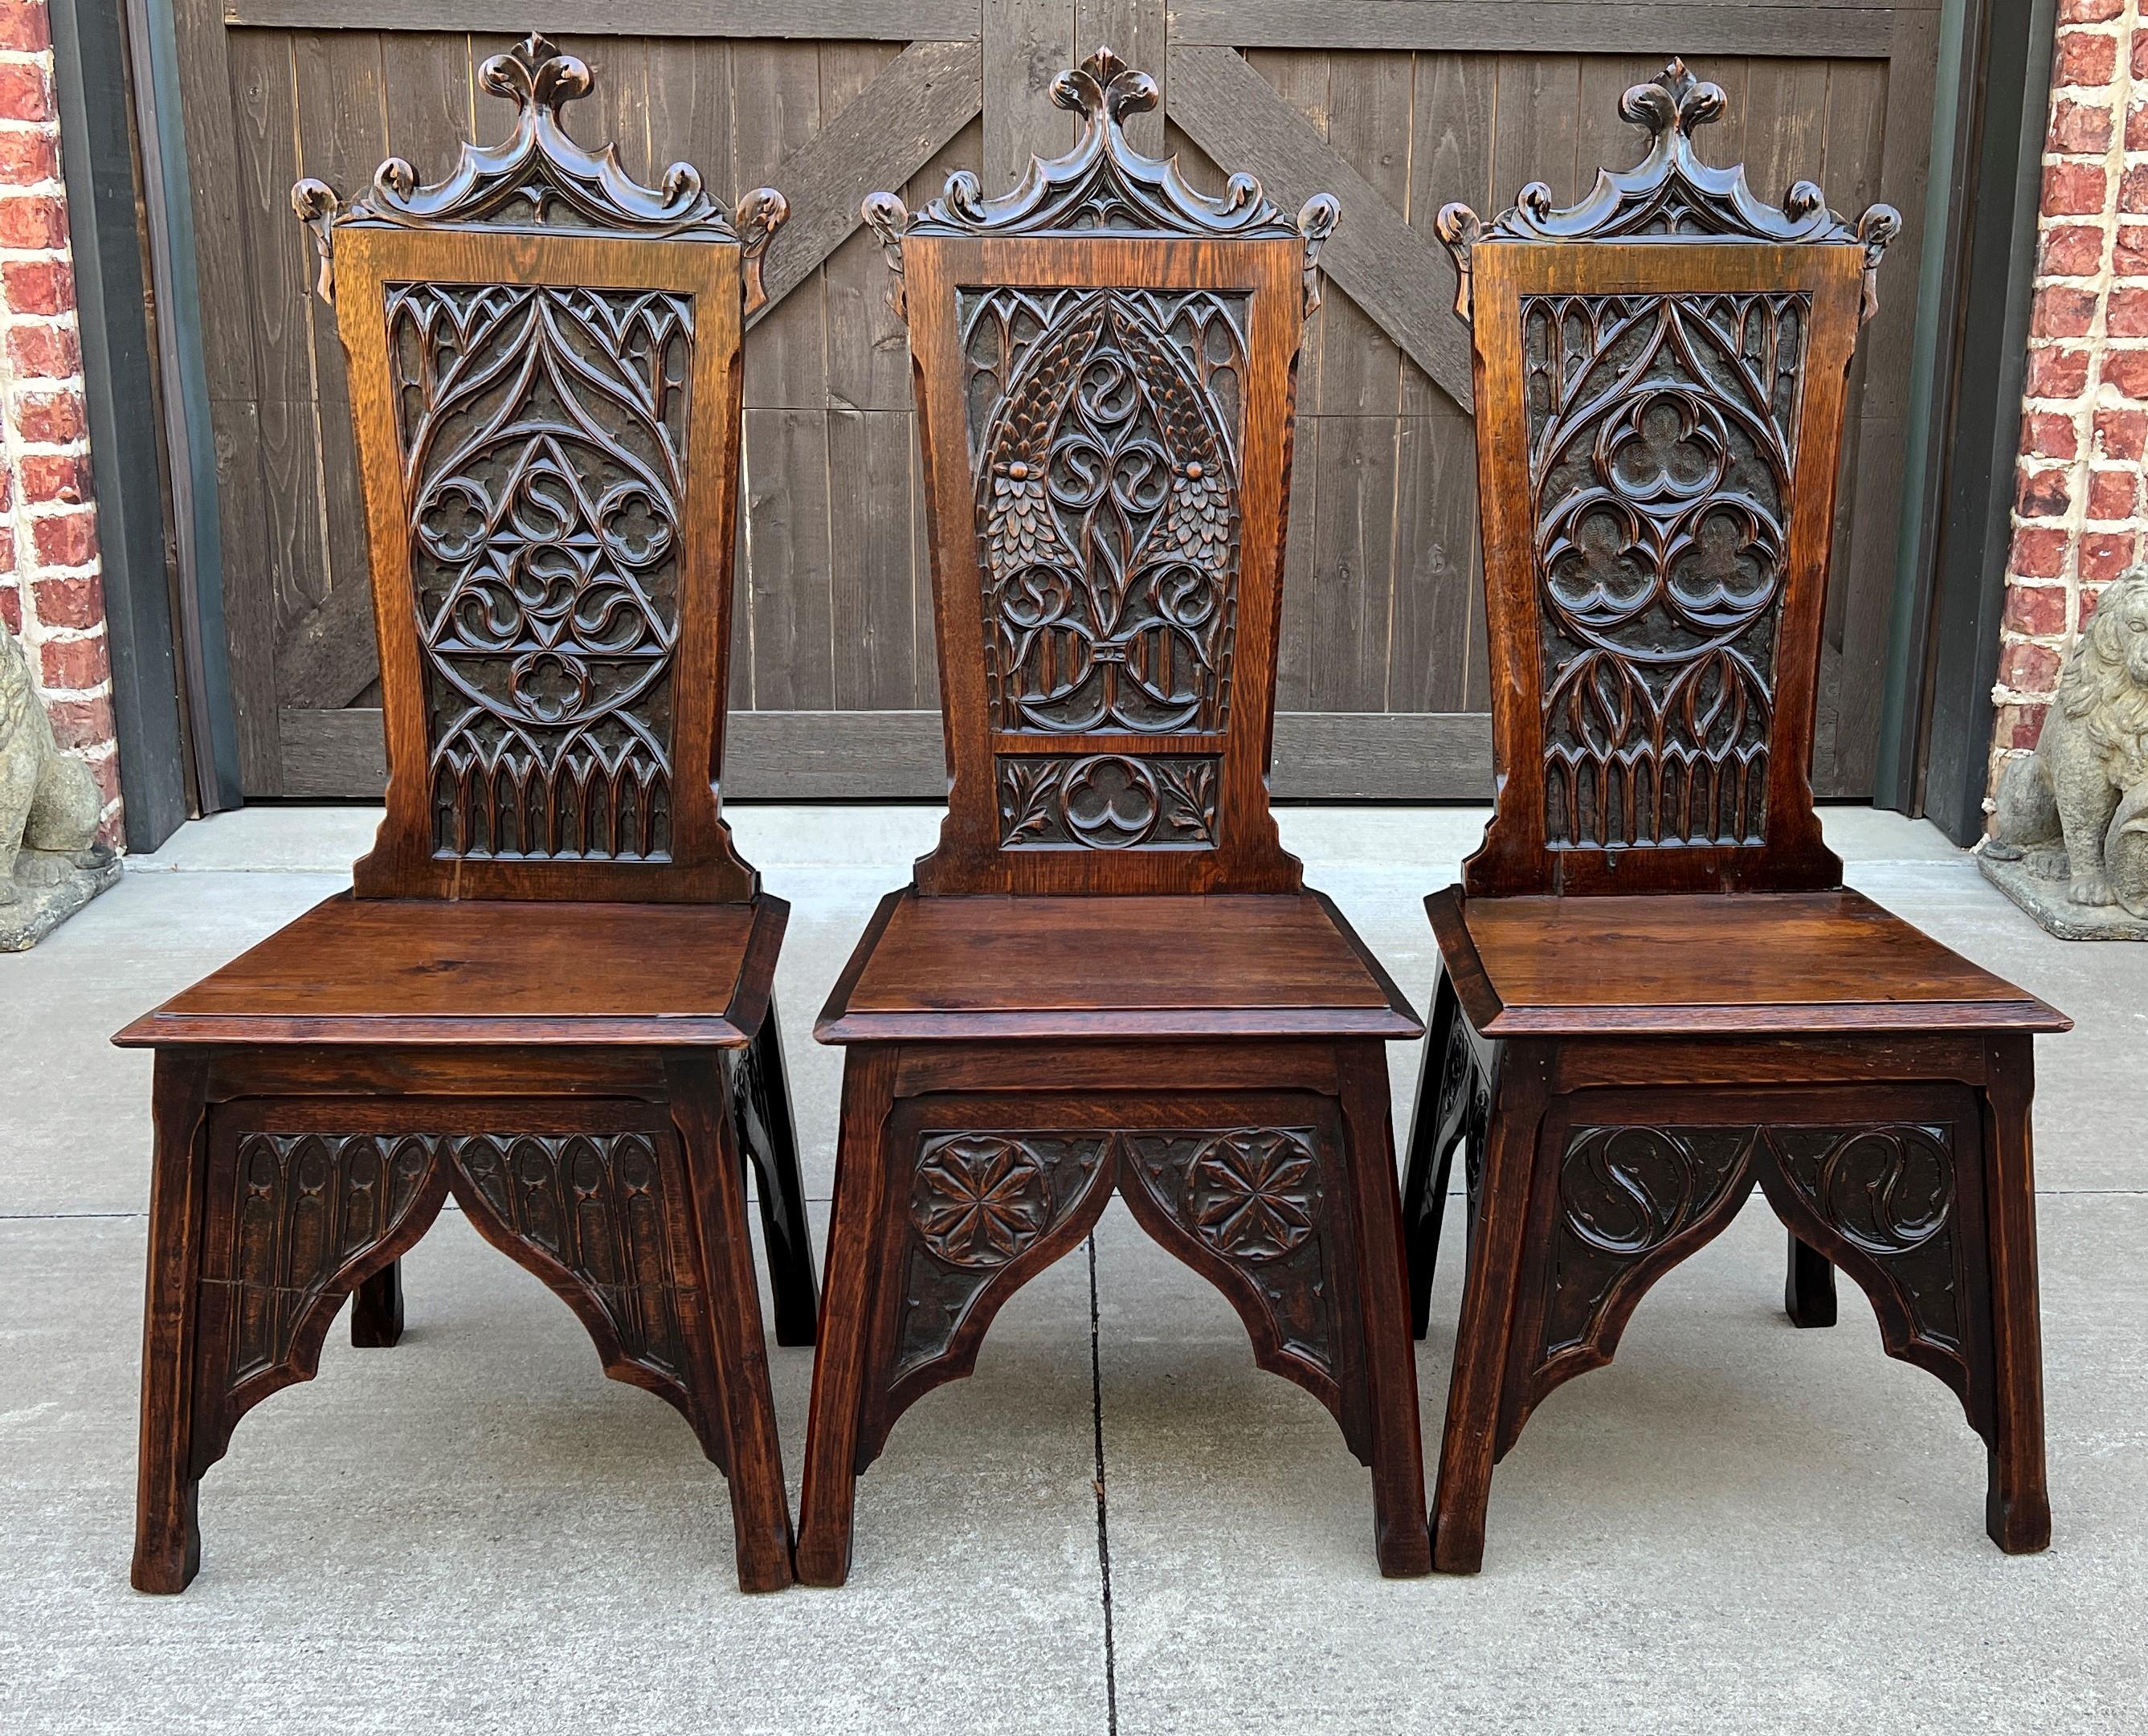 Antique French Chairs Set of 6 Gothic Revival Oak Pegged Dining Side Chairs 19C 4